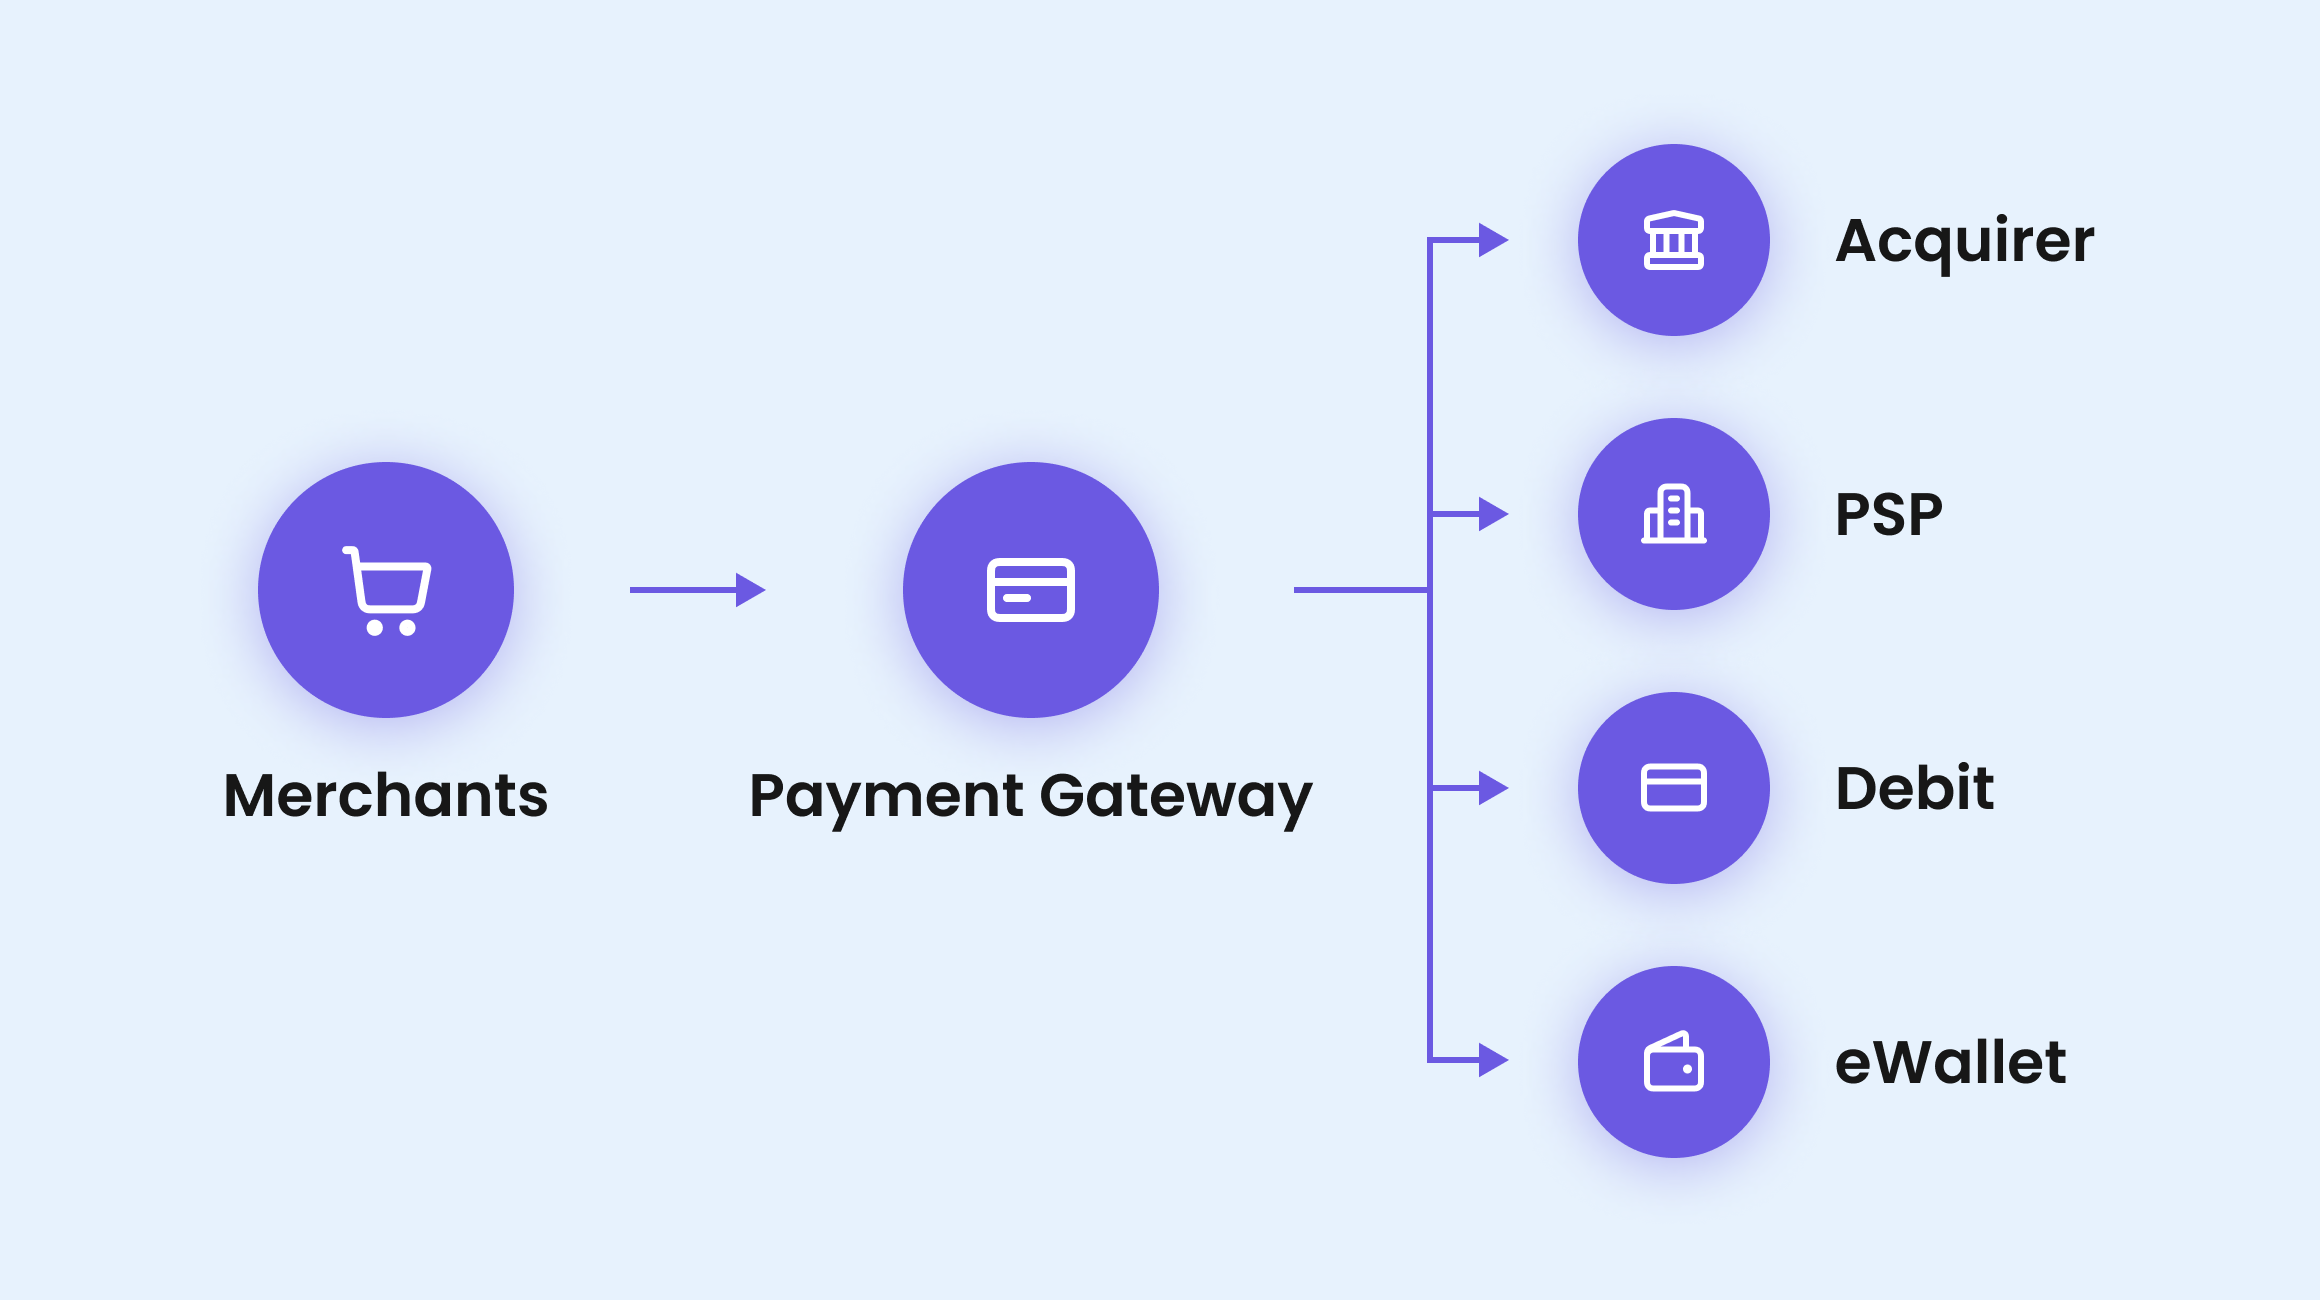 How payment gateway works